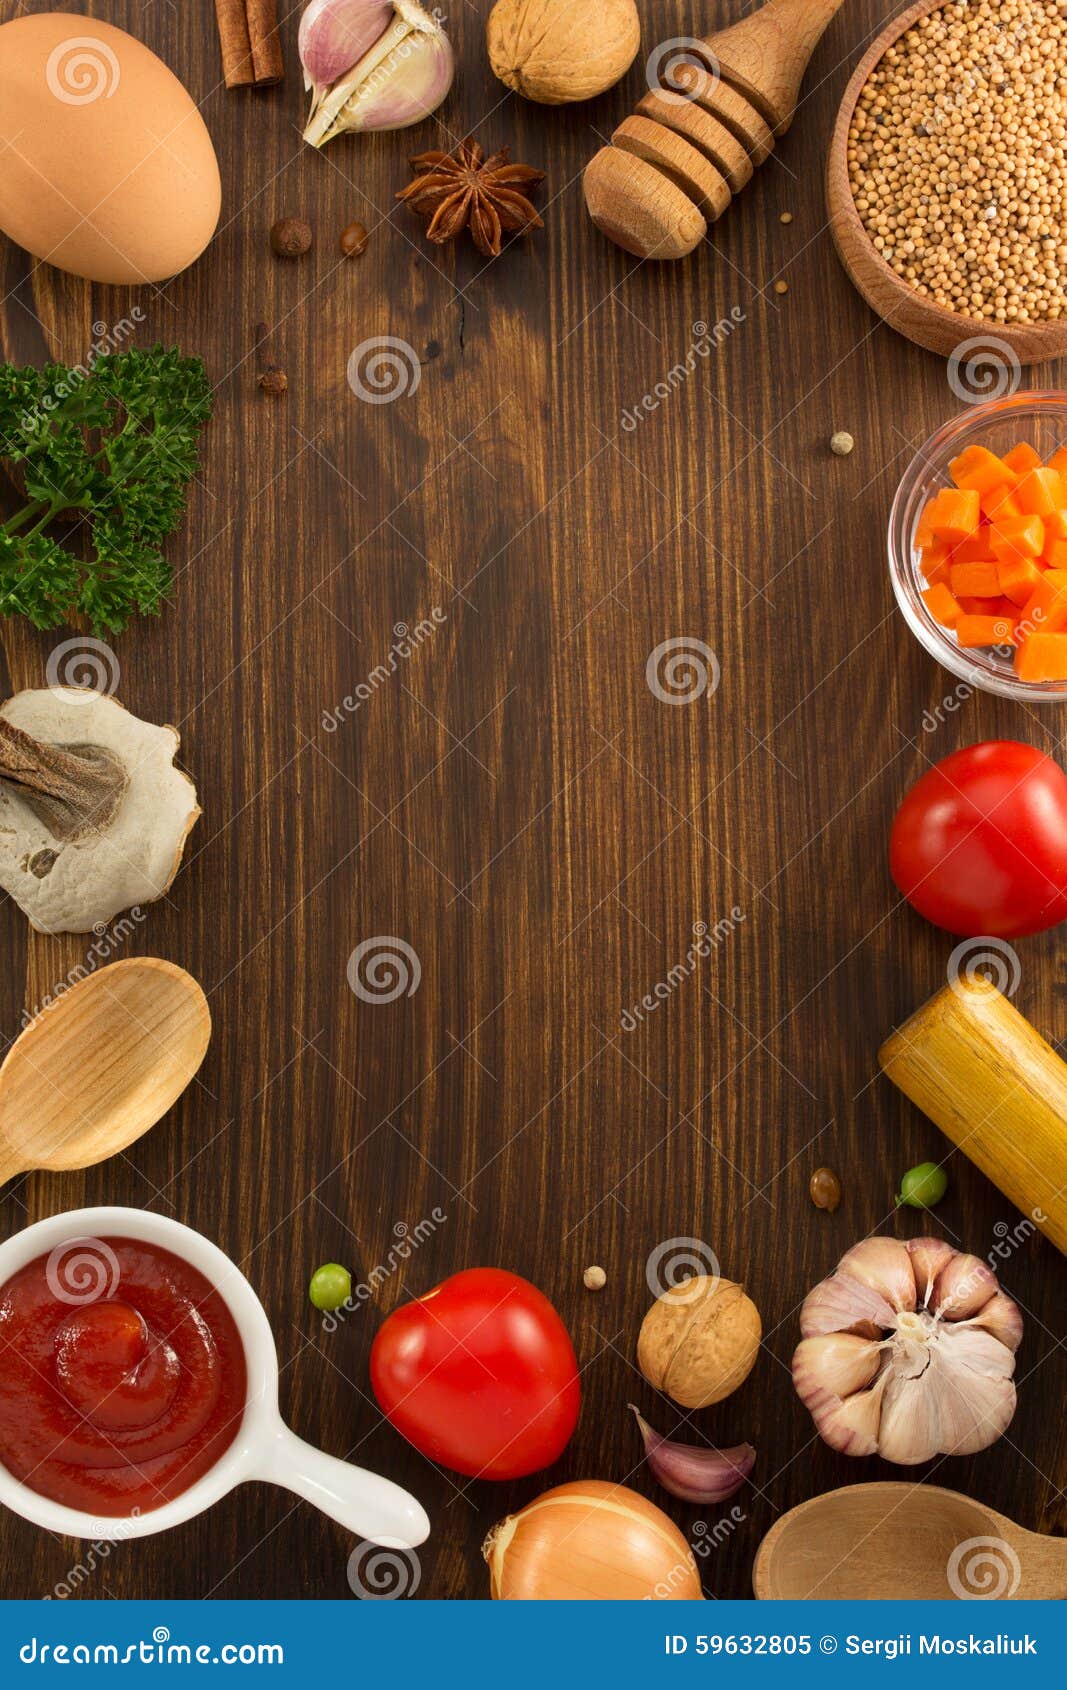 Herbs and spices on wood stock image. Image of background - 59632805